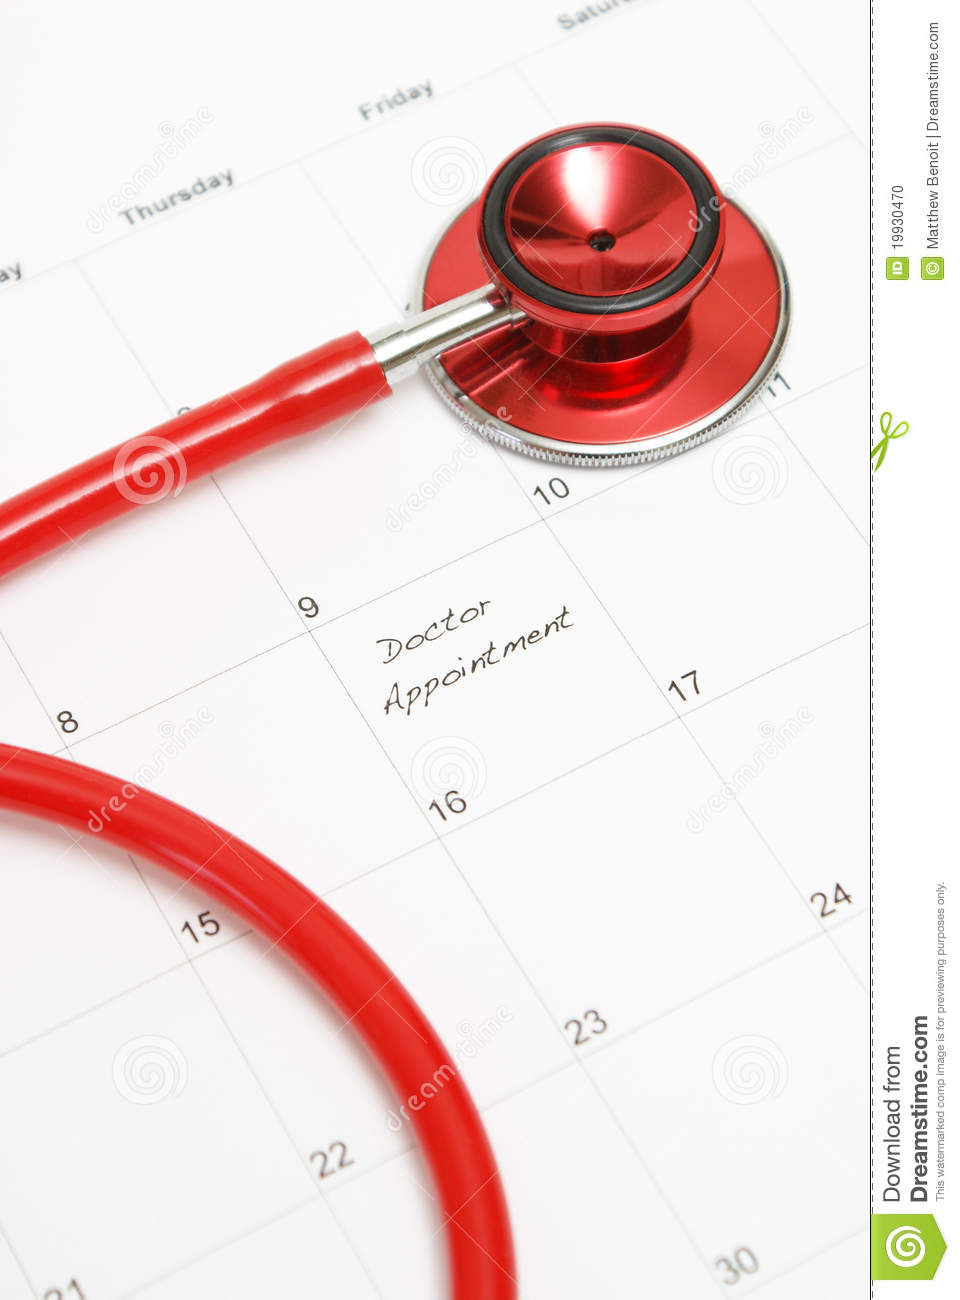 Scheduled Doctors Appointment Is Wrote On A Calendar For A Patient